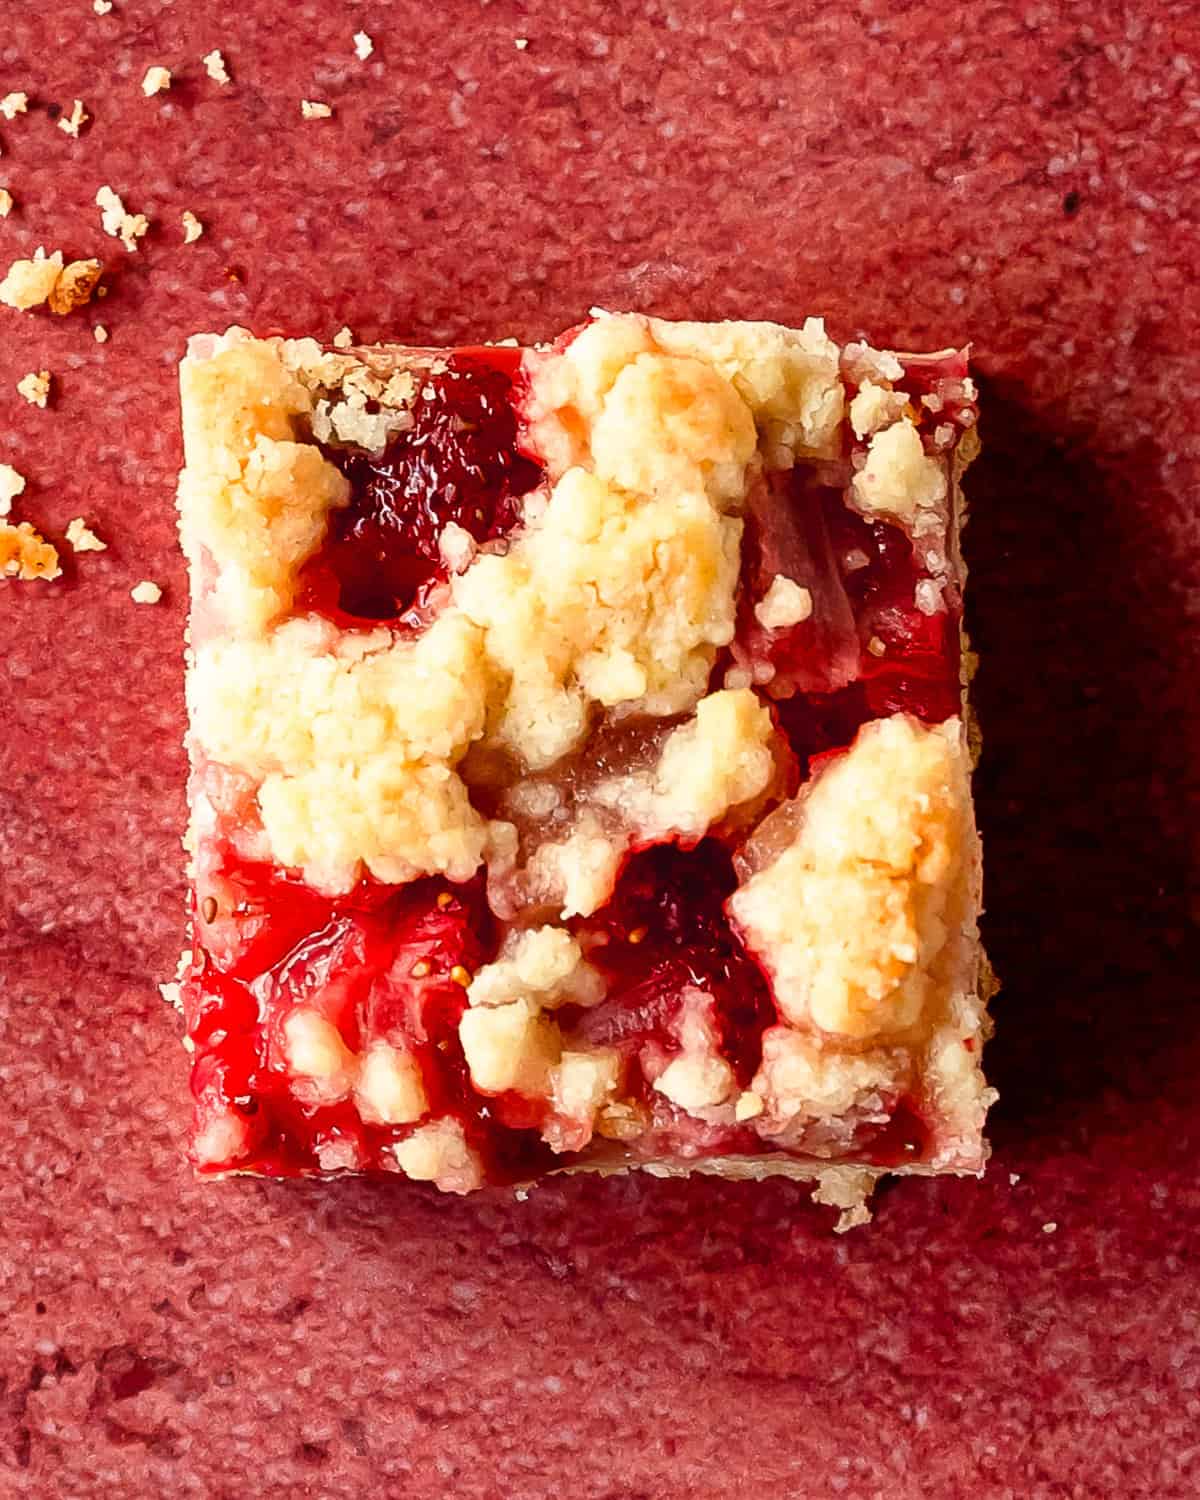 Strawberry bars are wonderfully delicious cookie crumble bars made with a press in shortbread crust, fresh strawberry filling and a buttery crumb topping. These strawberry crumb bars are quick and easy to make using a few simple ingredients. Make this easy strawberry dessert for the the perfect, refreshing treat to enjoy on a hot day.  